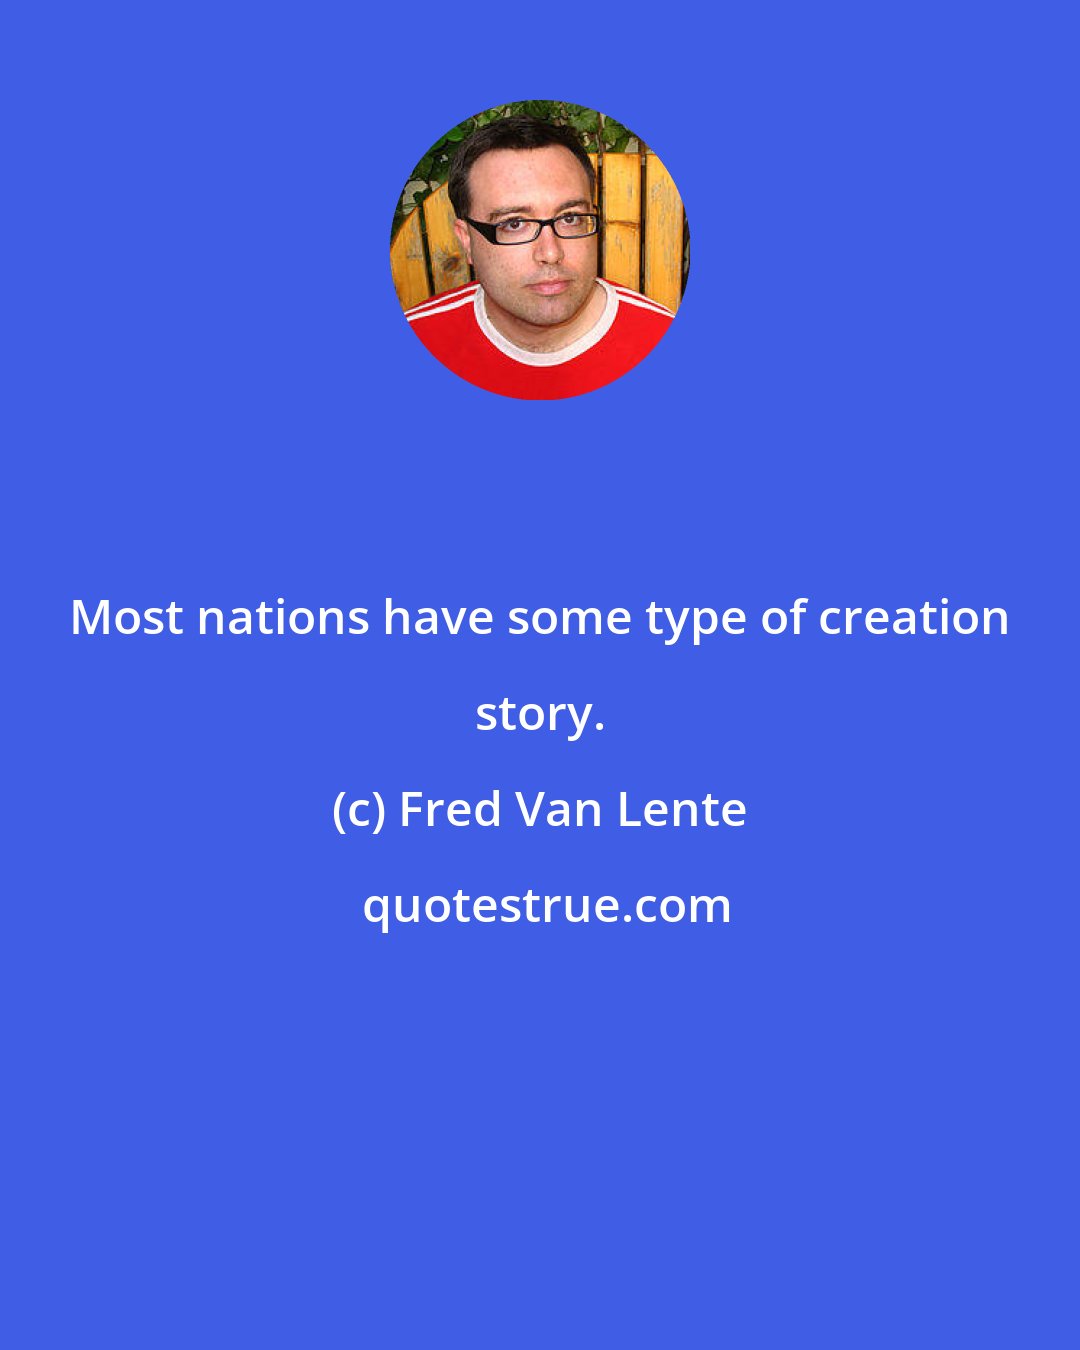 Fred Van Lente: Most nations have some type of creation story.